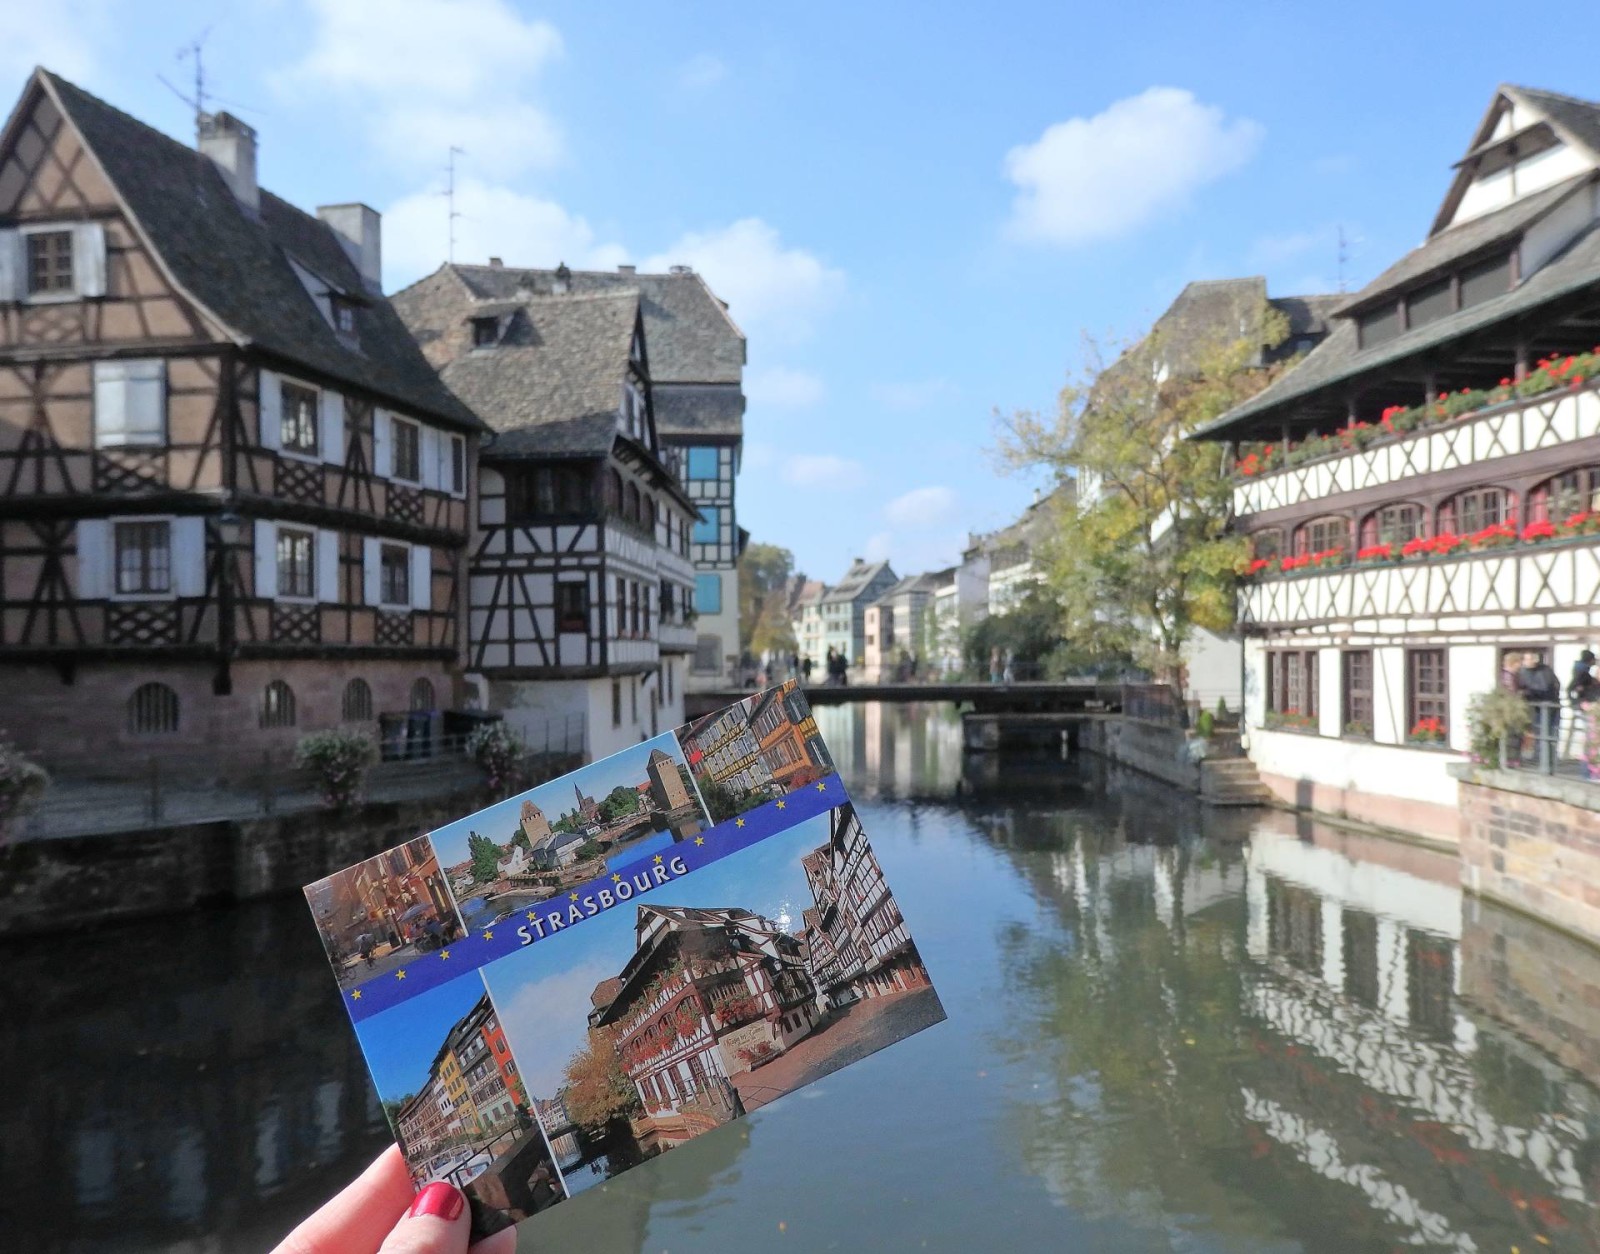 France Travel Inspirationvisiting Strasbourg, France on your next vacation then you've picked one of the prettiest cities in France to visit!  Here's my Guide of Things to Do and See in Strasbourg France...it's a perfect city to visit for 2-3 days plus there are some handy gluten free food traveling tips in there as well. 